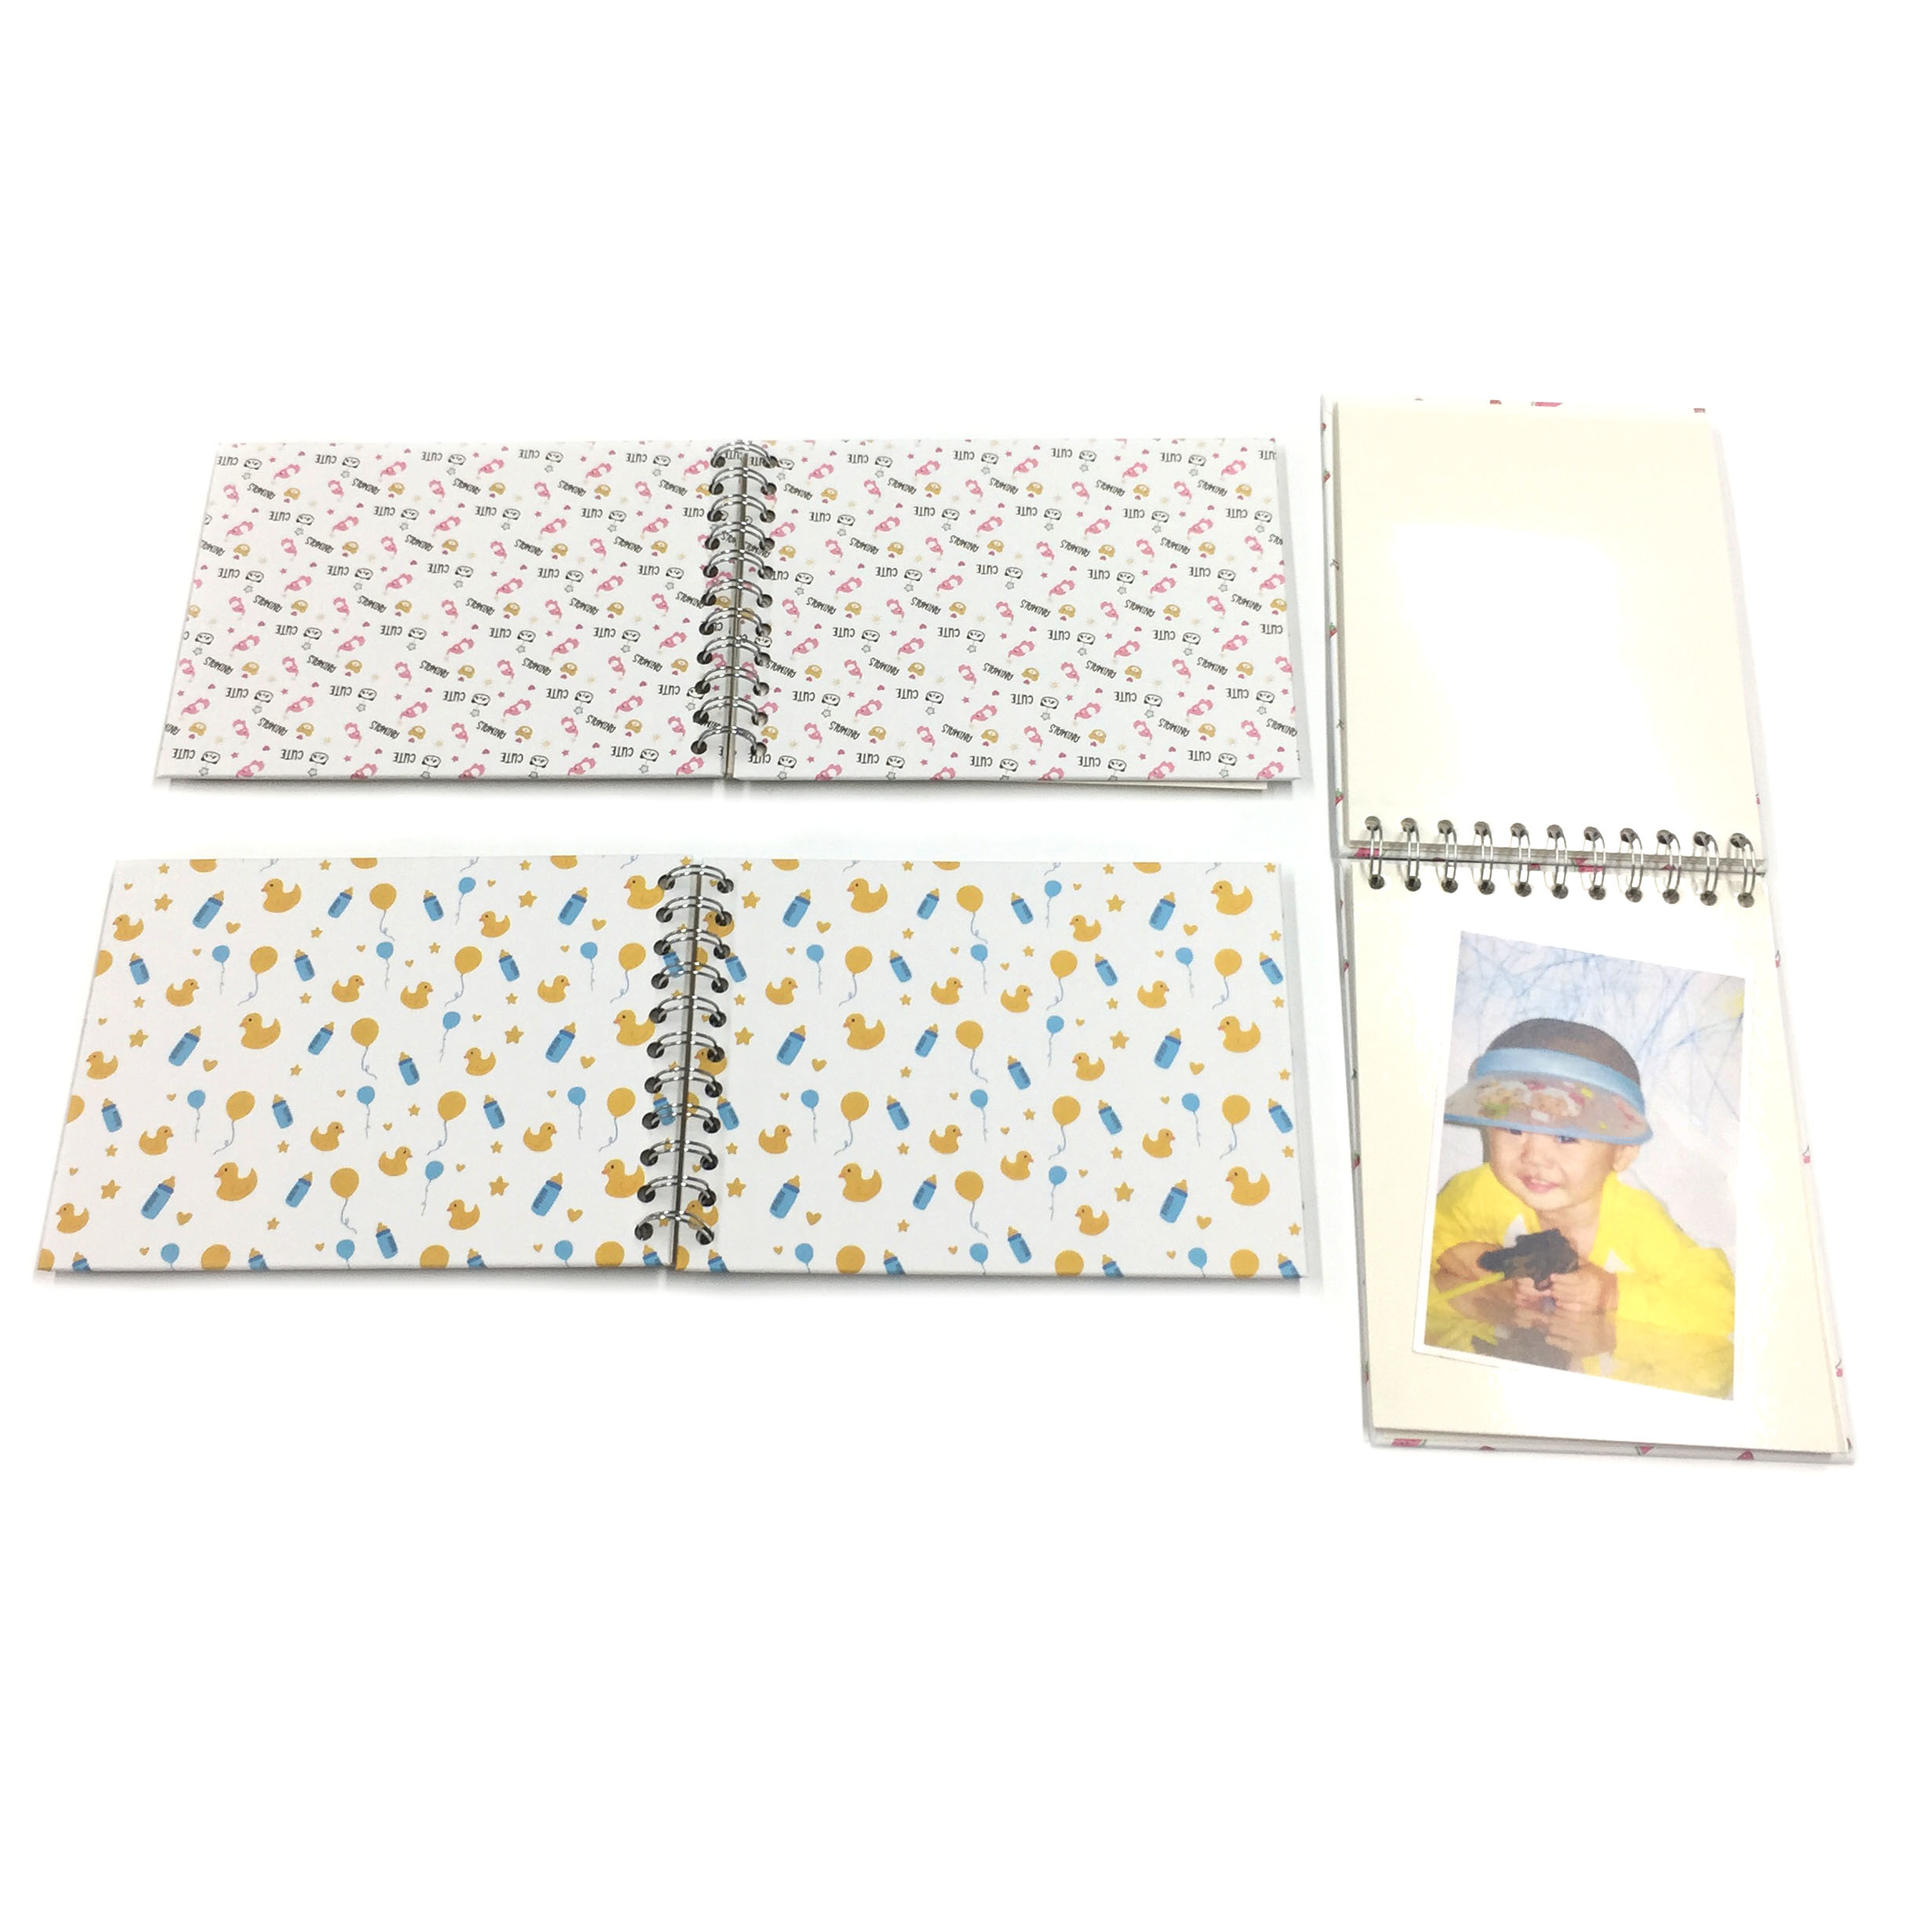 product-Dezheng-Bulk Purchase Spiral Bound 5x7 Self Stick Photo Album for Christmas With 20 Pages,cu-3